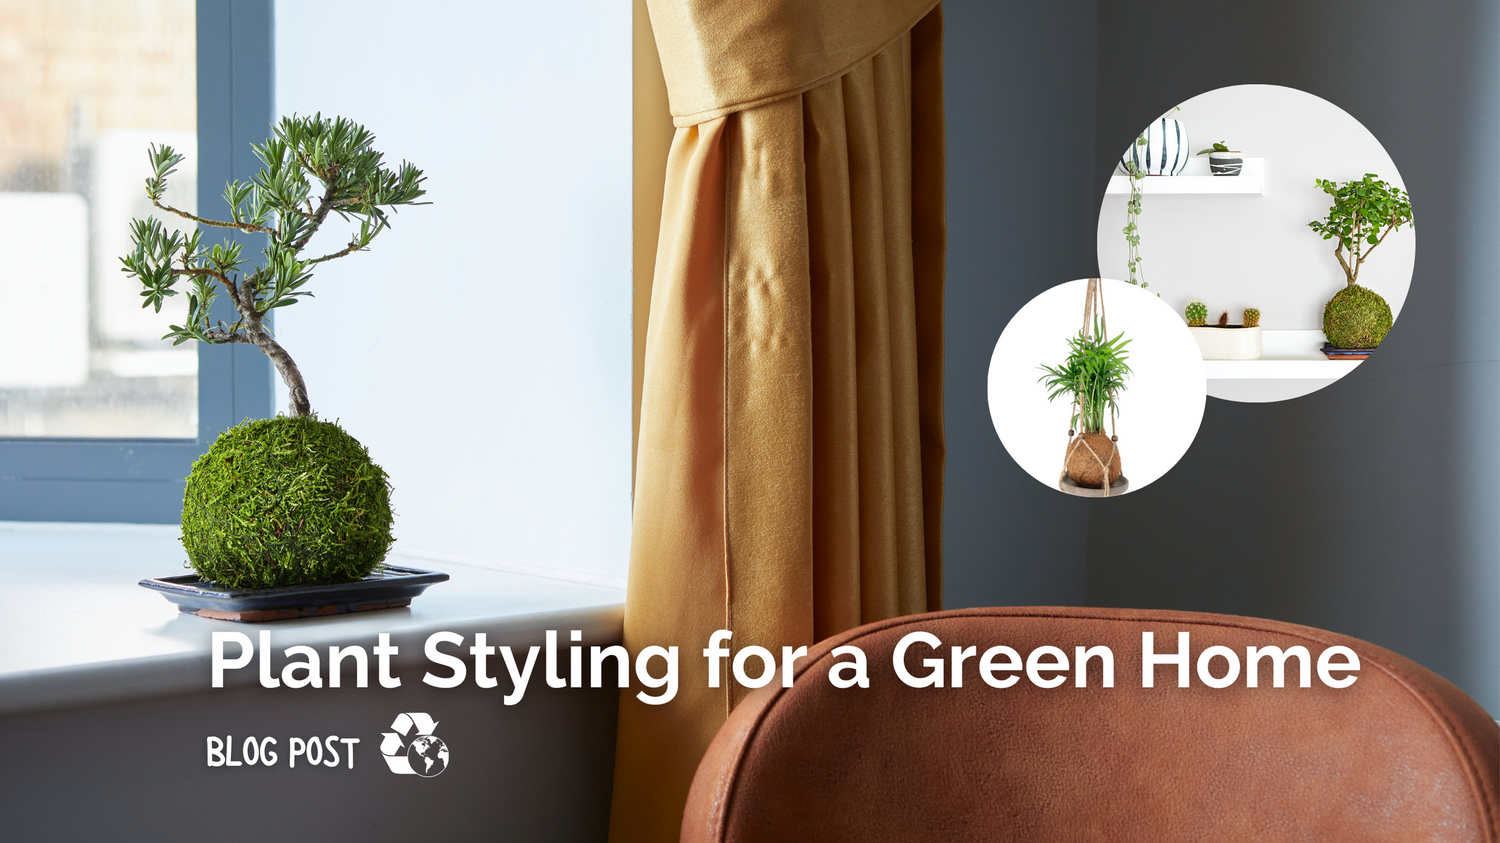 How to make a ‘Green’ Home with Plant Styling